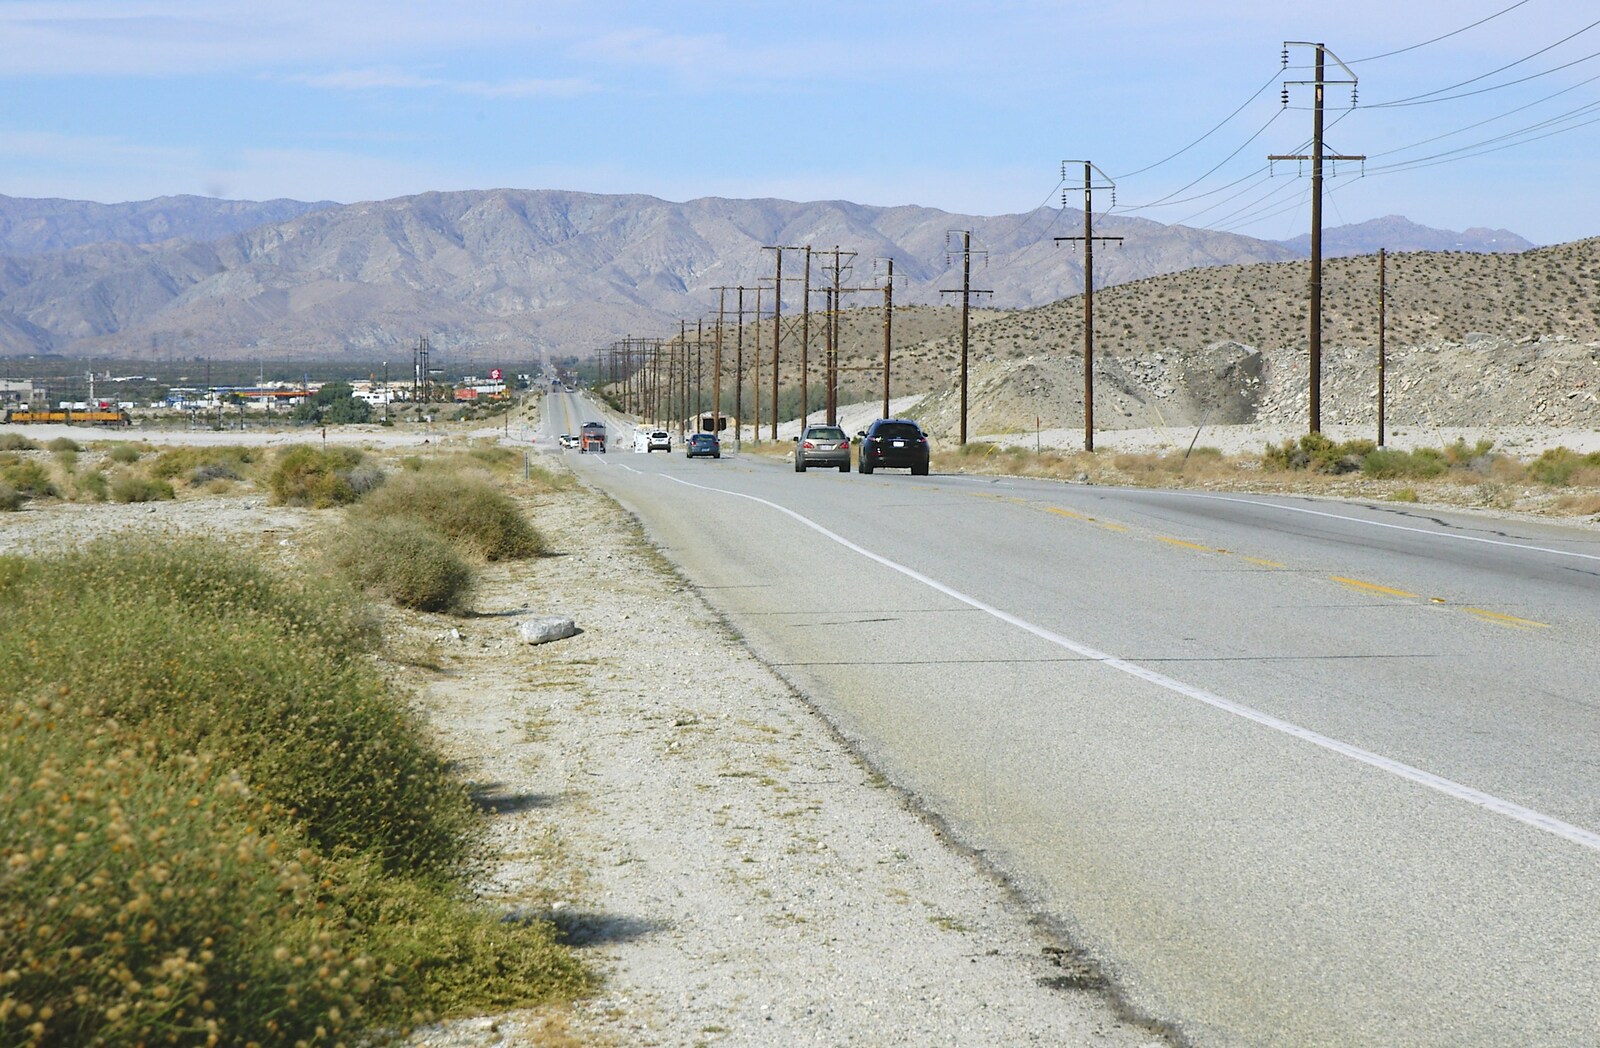 A desert road from Mojave Desert: San Diego to Joshua Tree and Twentynine Palms, California, US - 5th March 2006